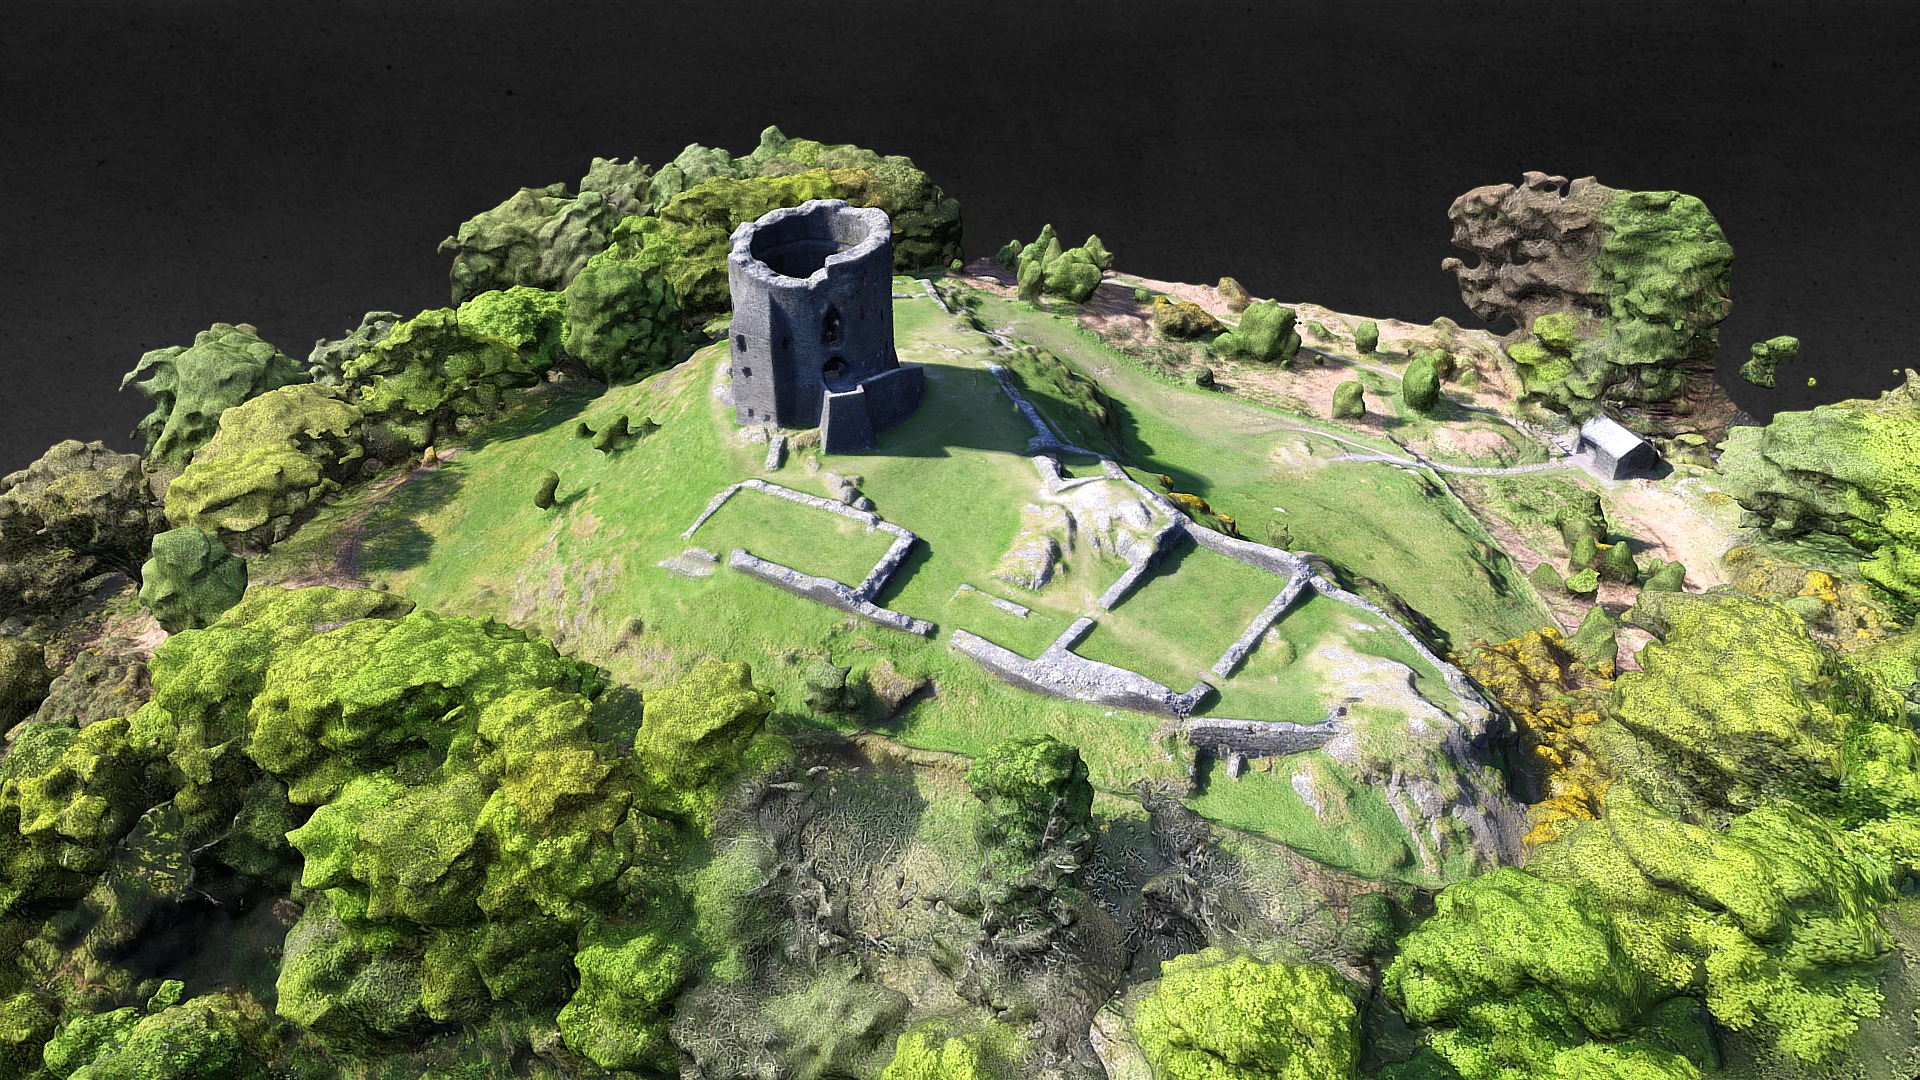 3D model Castell Dolbadarn, Snowdonia - This is a 3D model of the Castell Dolbadarn, Snowdonia. The 3D model is about a winding road through a green landscape.